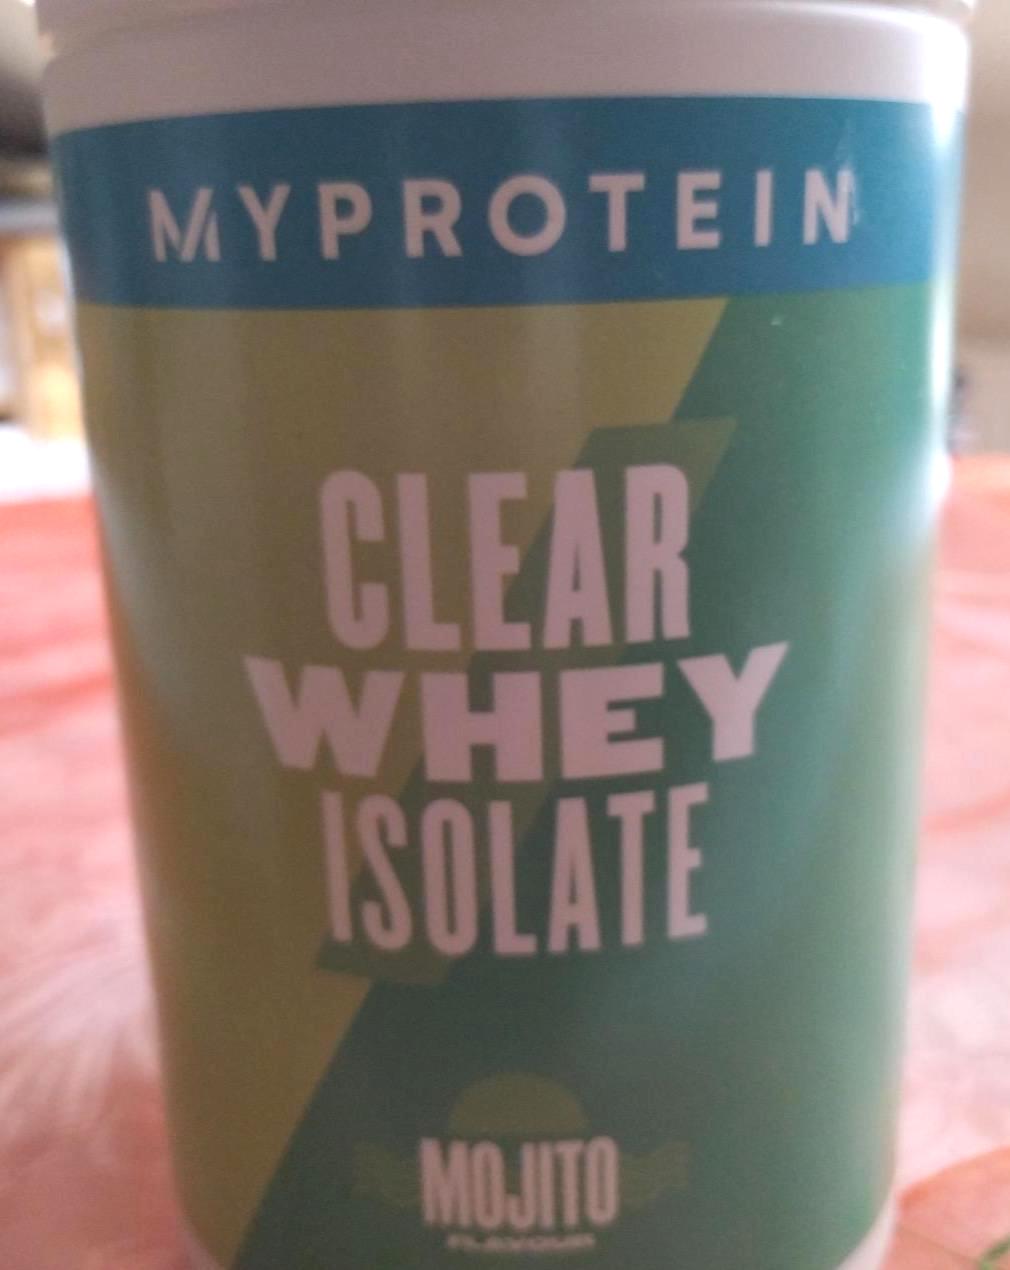 Képek - Clear whey isolate Mojito MyProtein